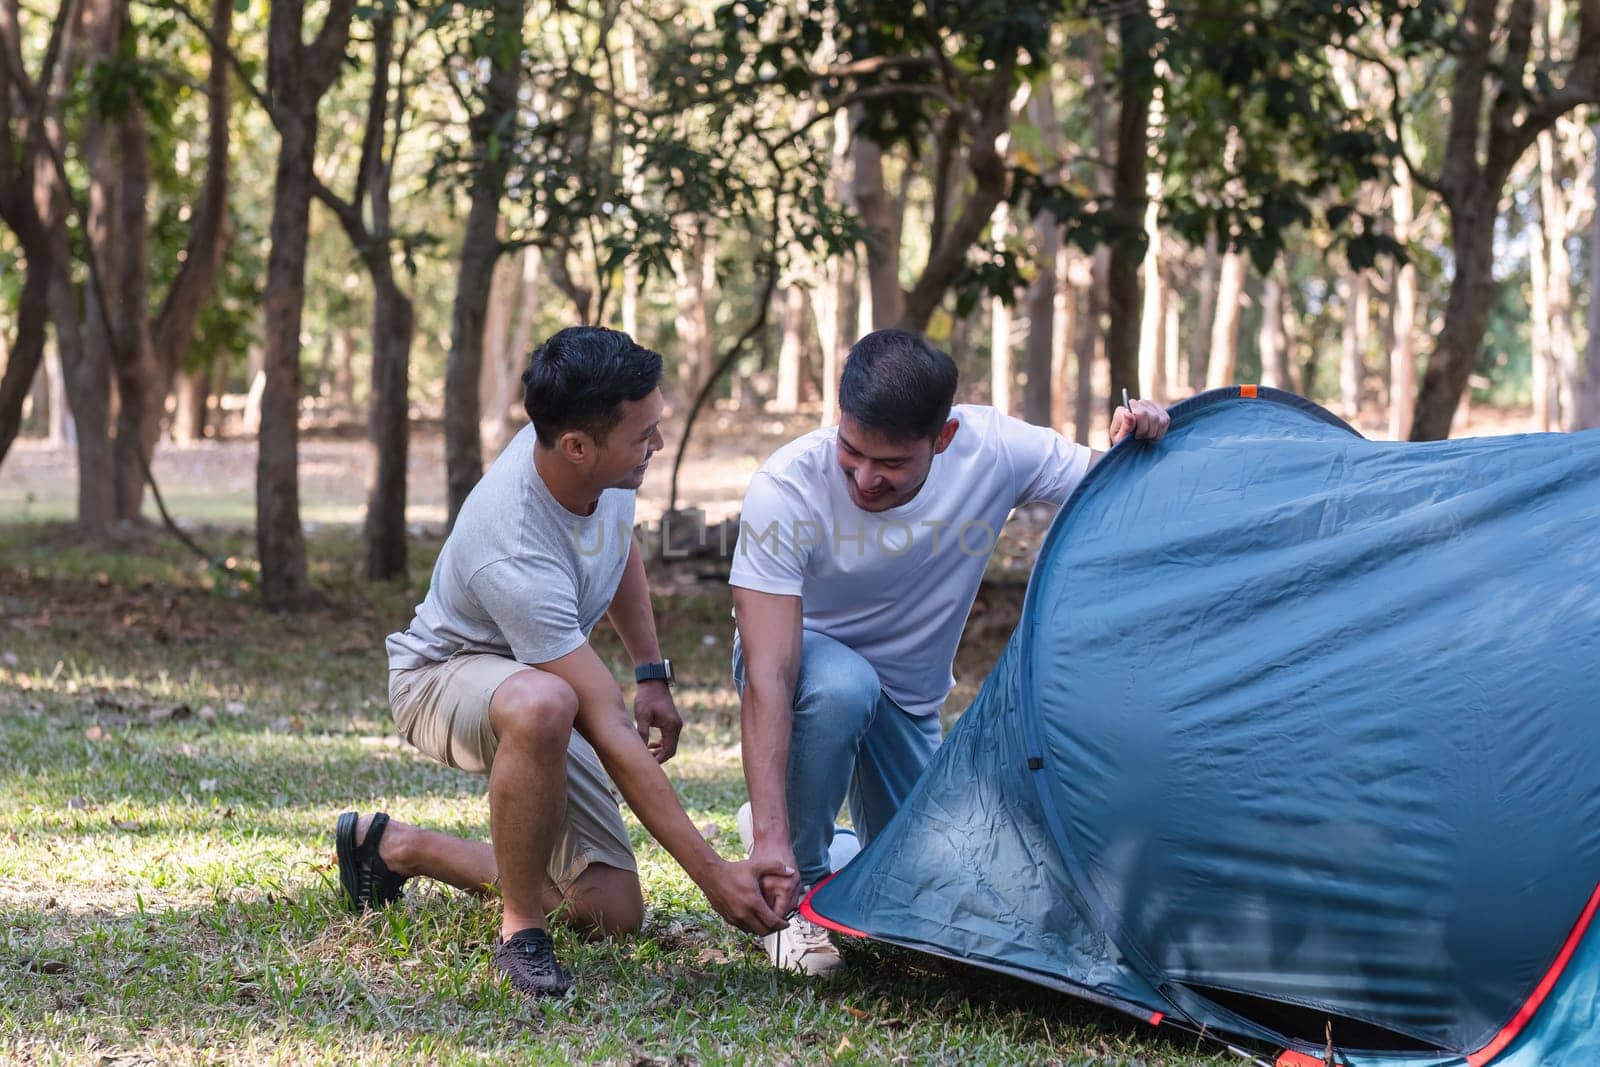 Asian LGBTQ couple camping together Set up a tent on the grass during the weekend.